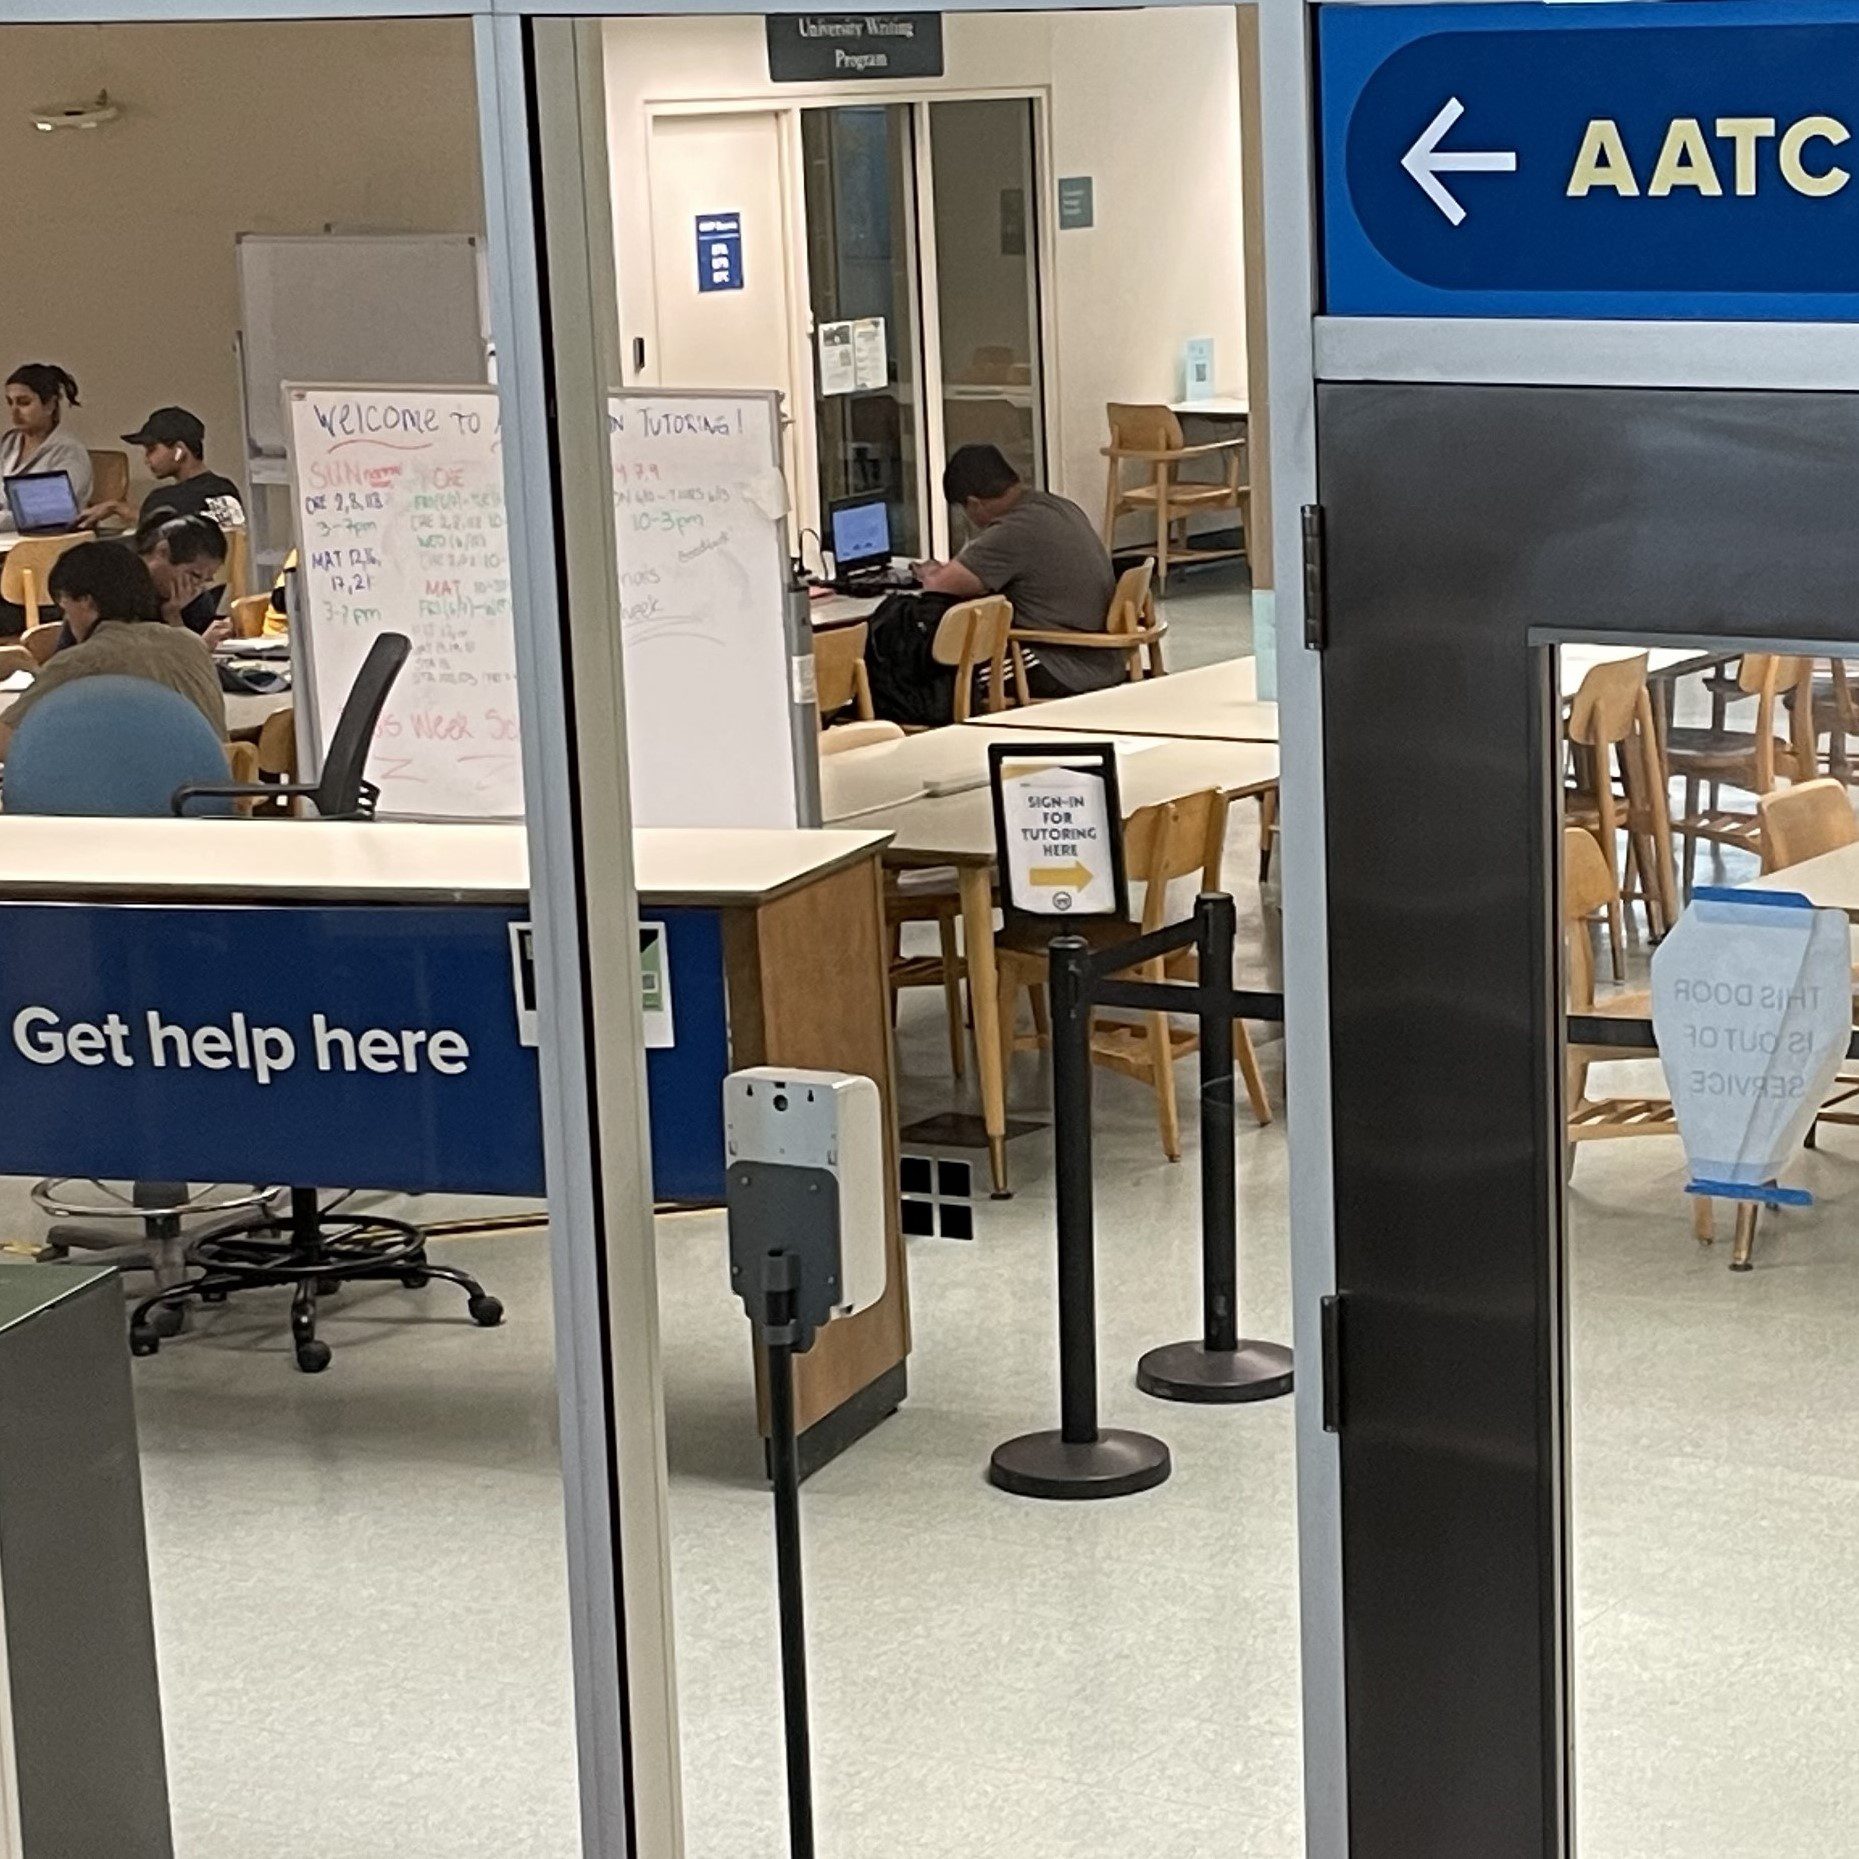 AATC drop-in tutoring entrance with "Get Help Here" sign and students studying the background